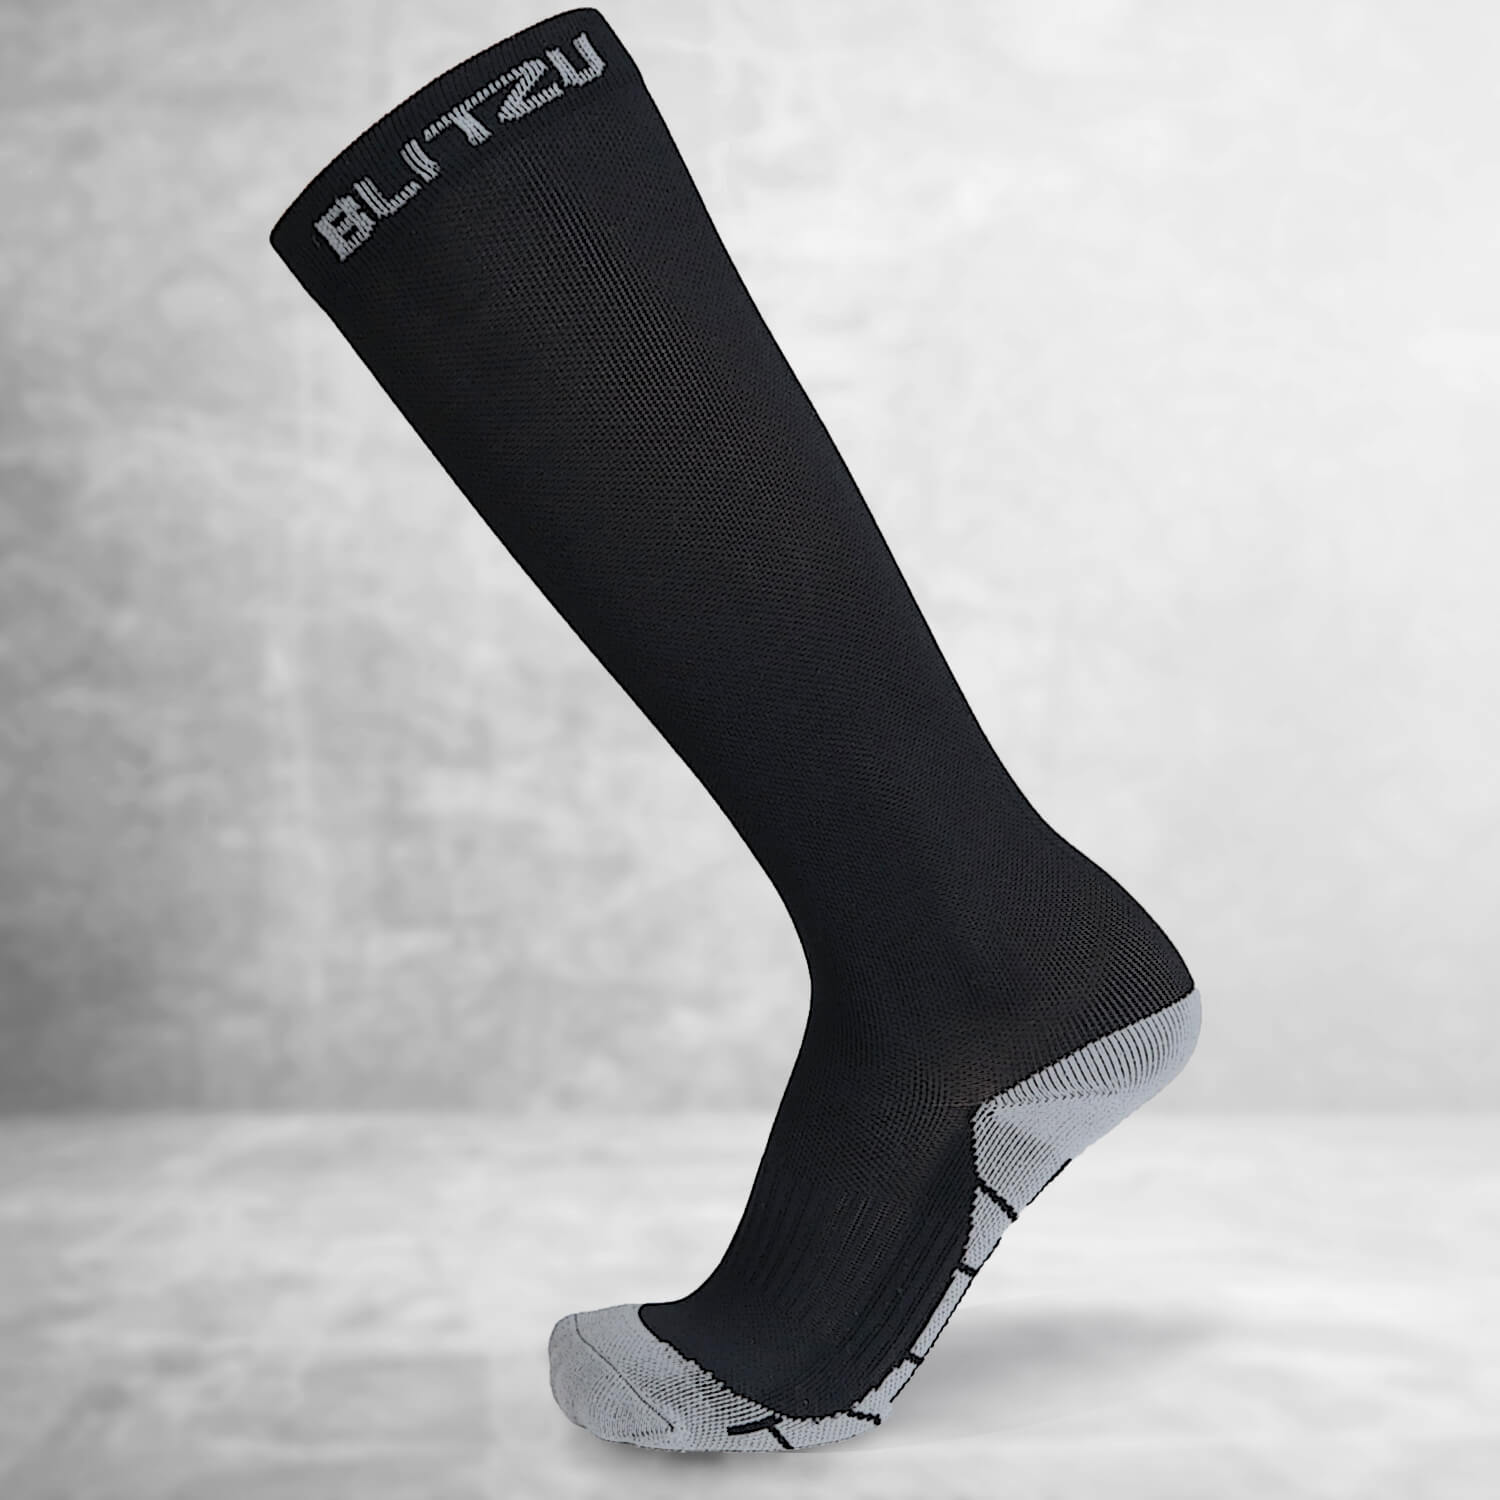 How Compression Socks Can Help Ease the Symptoms of Restless Leg